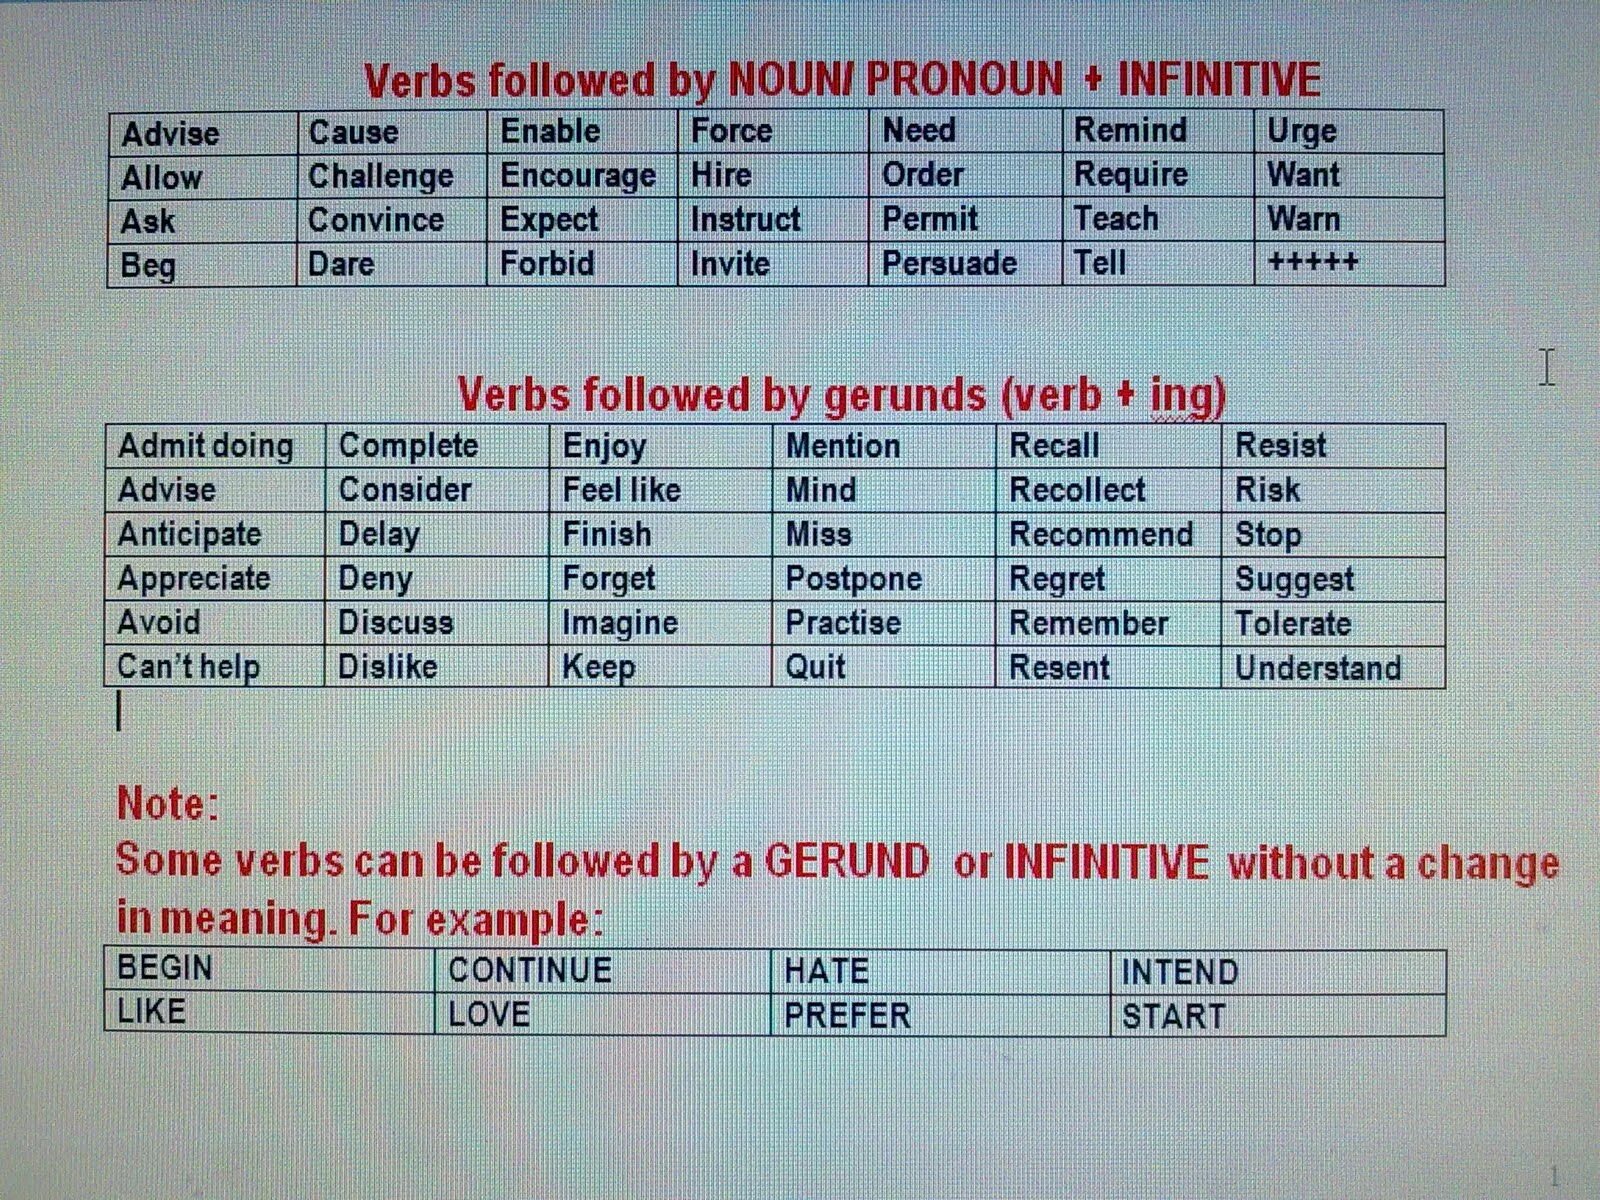 Verb ing verb Infinitive таблицы. Infinitive verbs list. Английские глаголы с to и ing. Infinitives verbs правило. 2 infinitive without to